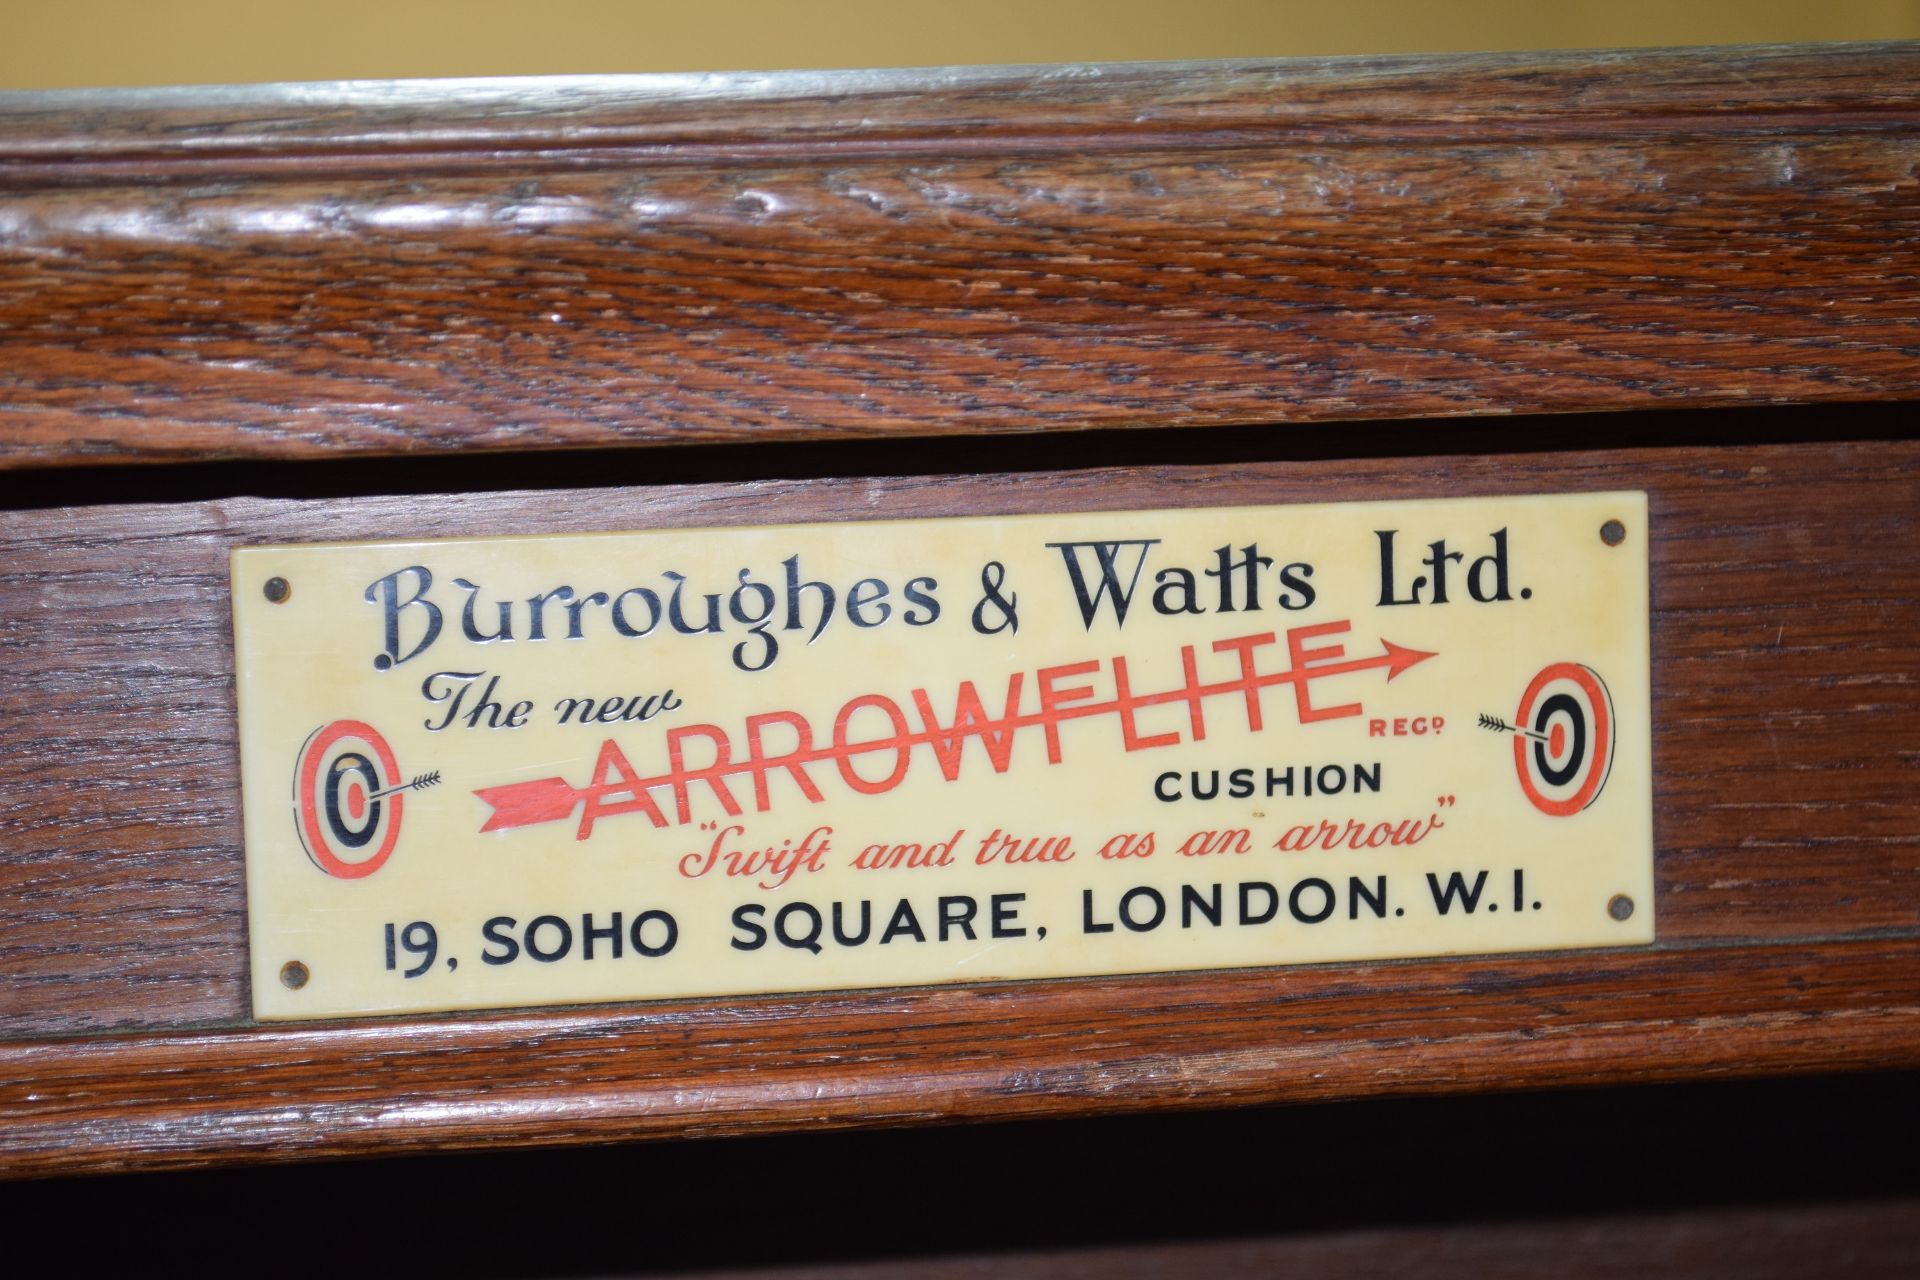 Full size Burroughs & Watts competition snooker table - Image 3 of 4